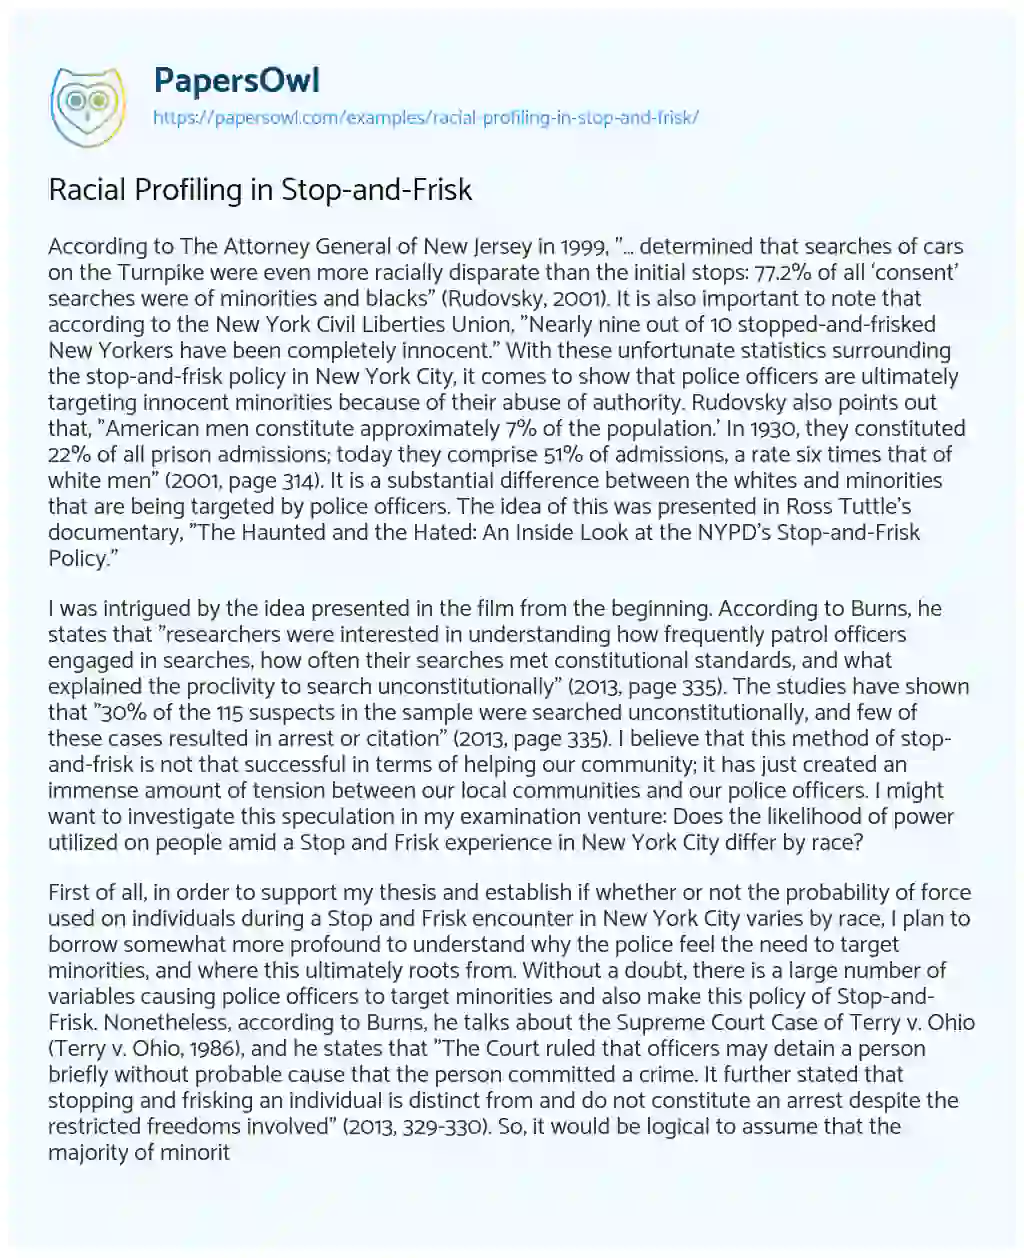 Racial Profiling in Stop-and-Frisk essay